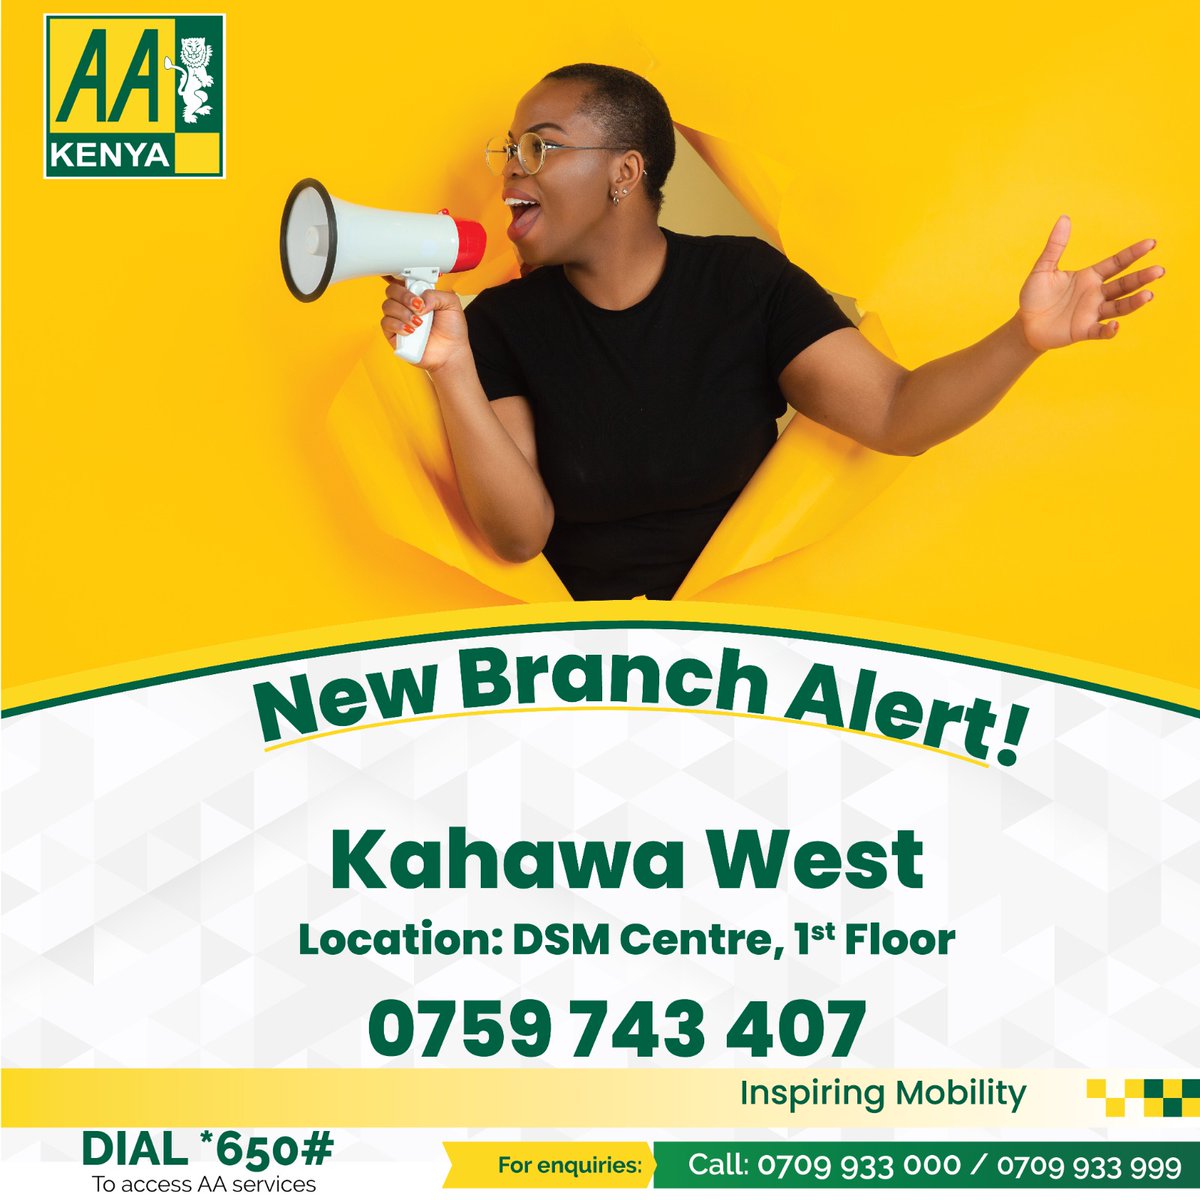 It's official! AA Kenya has expanded to Kahawa West, DSM Centre, 2nd floor. Our location is now open and ready to welcome you. Swing by and experience all that we have to offer. For more information call us on 0759743407/0709933000
#AAKenyacares #KahawaWest #InspiringMobility